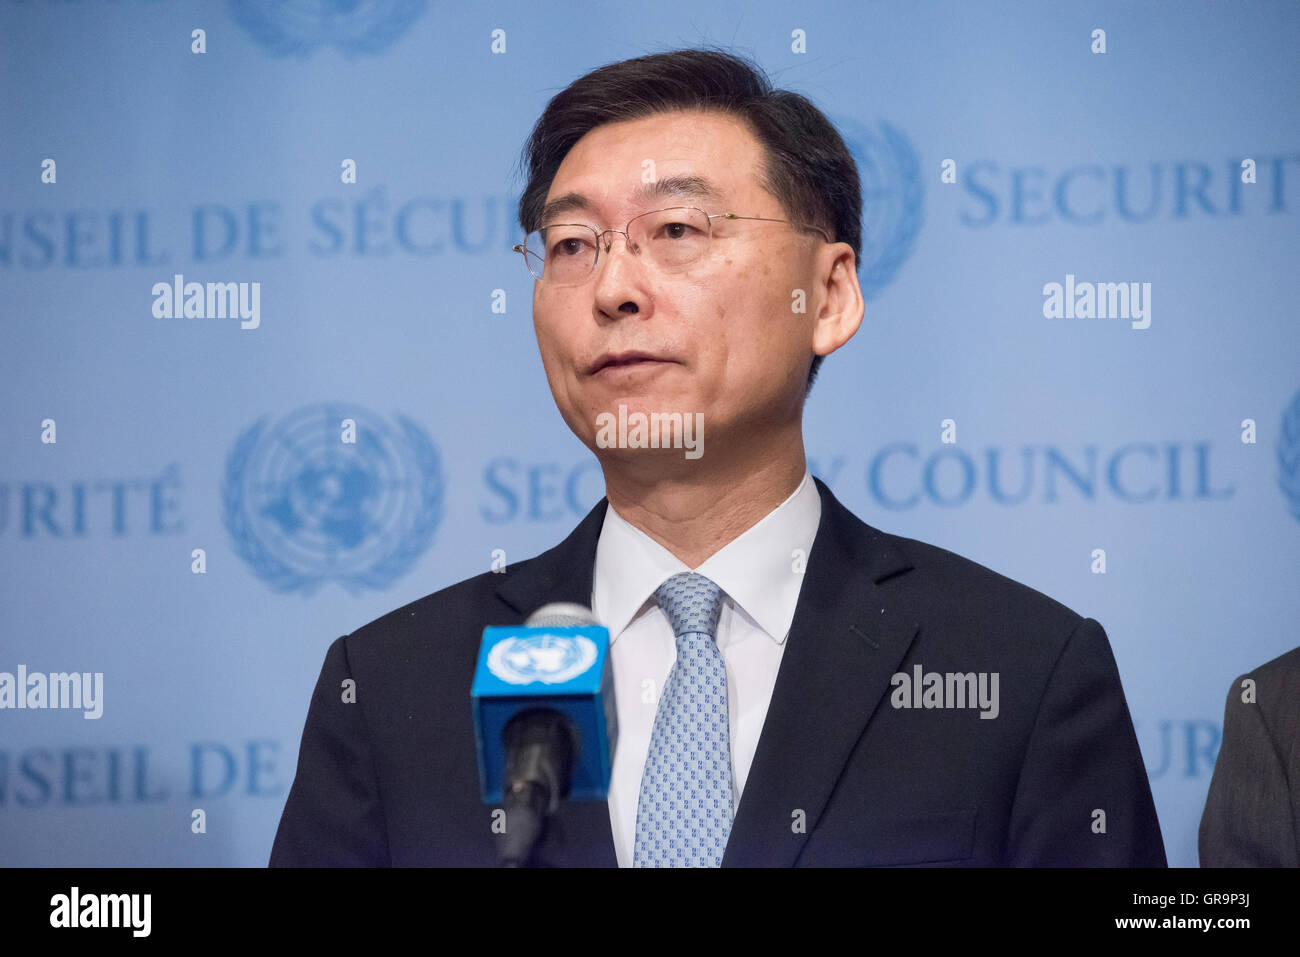 South Korean Deputy Permanent Representative to the UN Hahn Choong-hee speaks with the press. Following the September 5th test launch of what are believed to by three medium-range Rodong-class ballistic missiles by the Democratic People's Republic of Korea (DPRK) toward Japan, the United Nations Security Council held emergency consultations on the incident. Analysts believe that the test, conducted while world leaders met in China for the G20 summit, may have been conducted as a response to the possible installation of a Terminal High Altitude Area Defense (THAAD) system developed to defend So Stock Photo